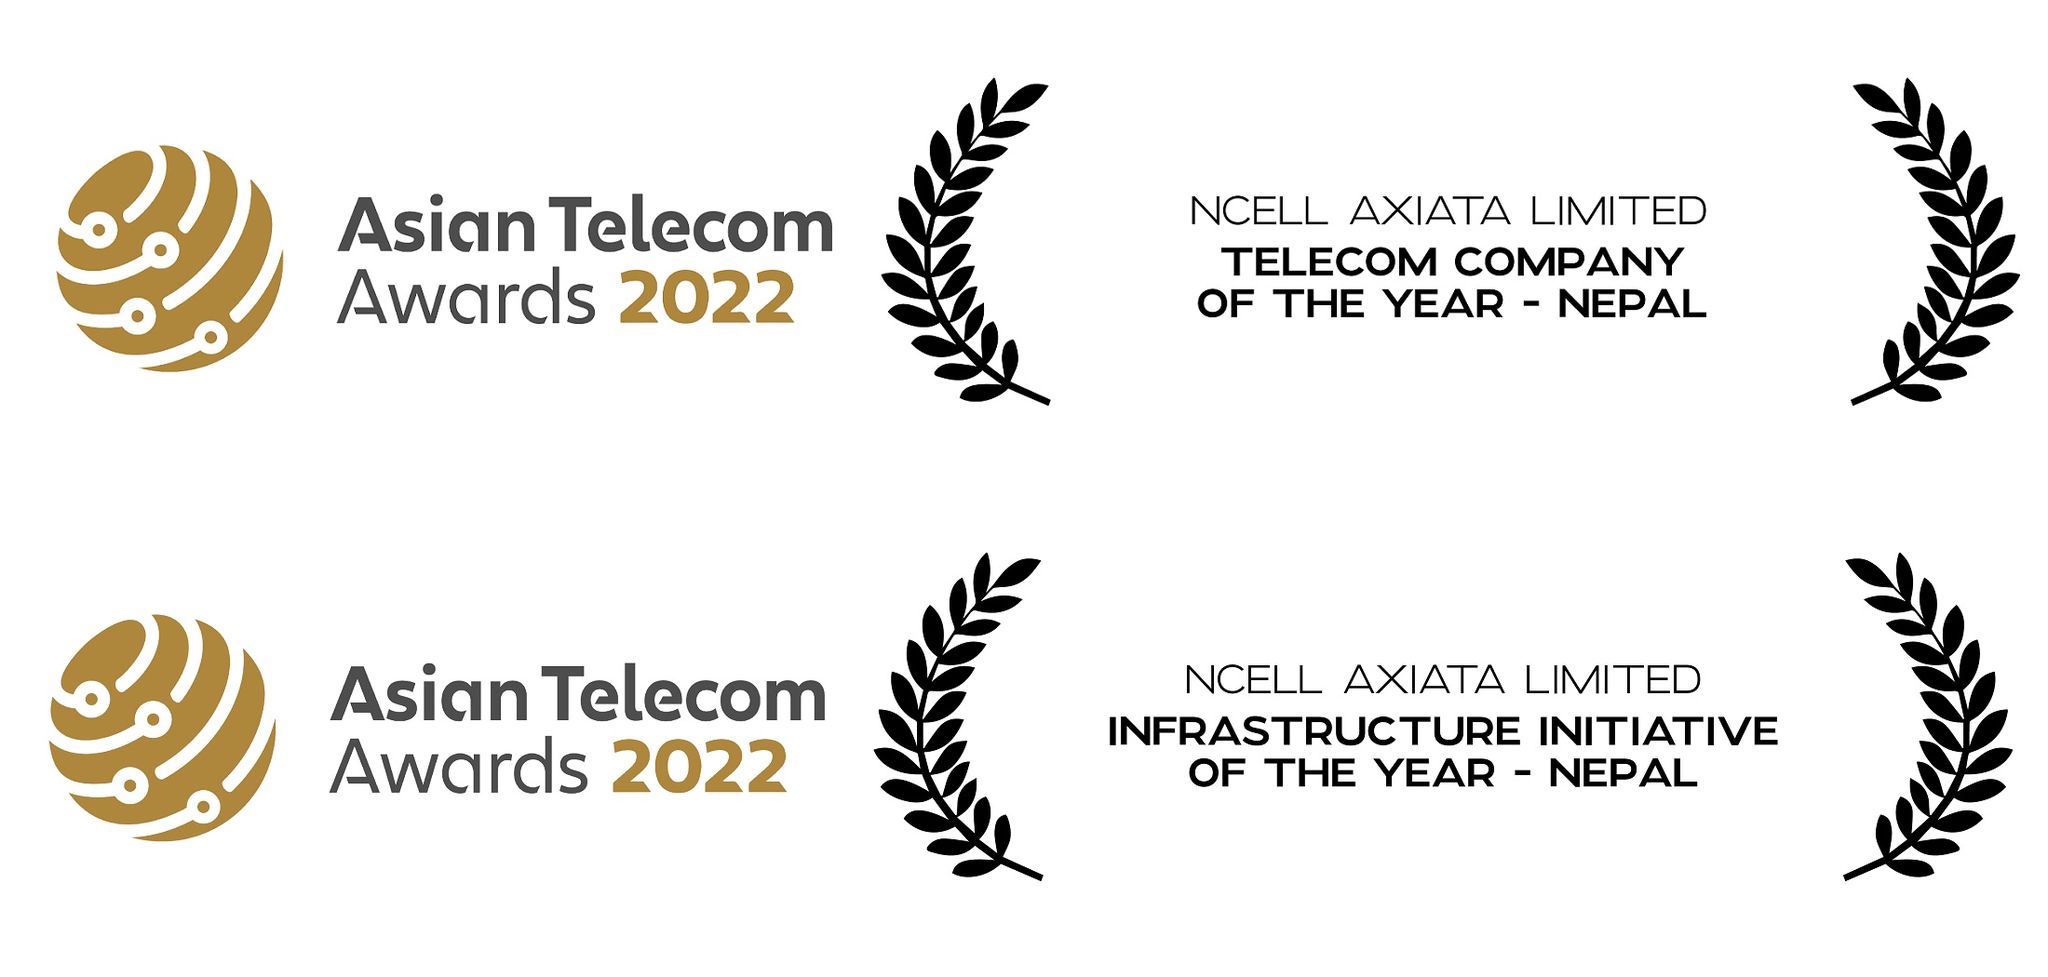 Ncell wins ‘Telecom Company of the Year’ and ‘Infrastructure Initiative of the Year’ awards